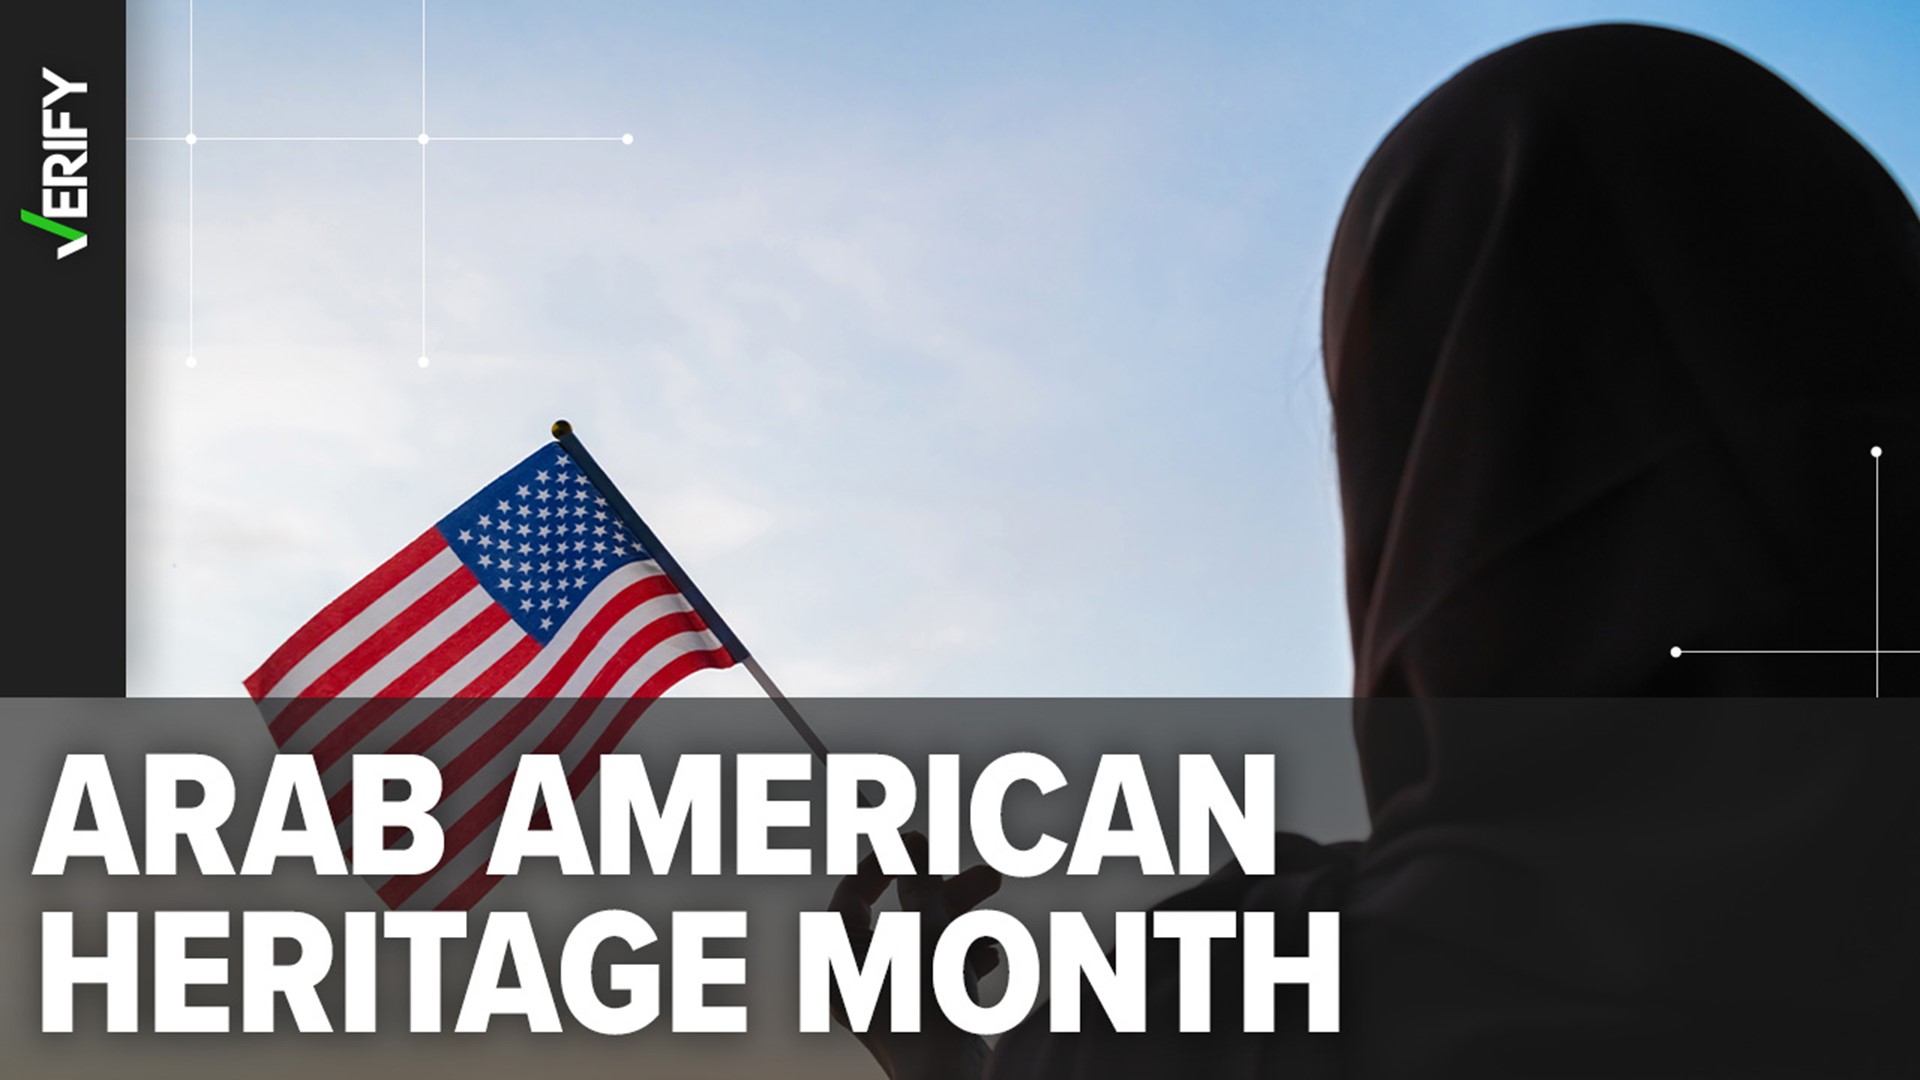 Arab American Heritage Month is observed each April to recognize the achievements and contributions of Arab Americans in the United States.